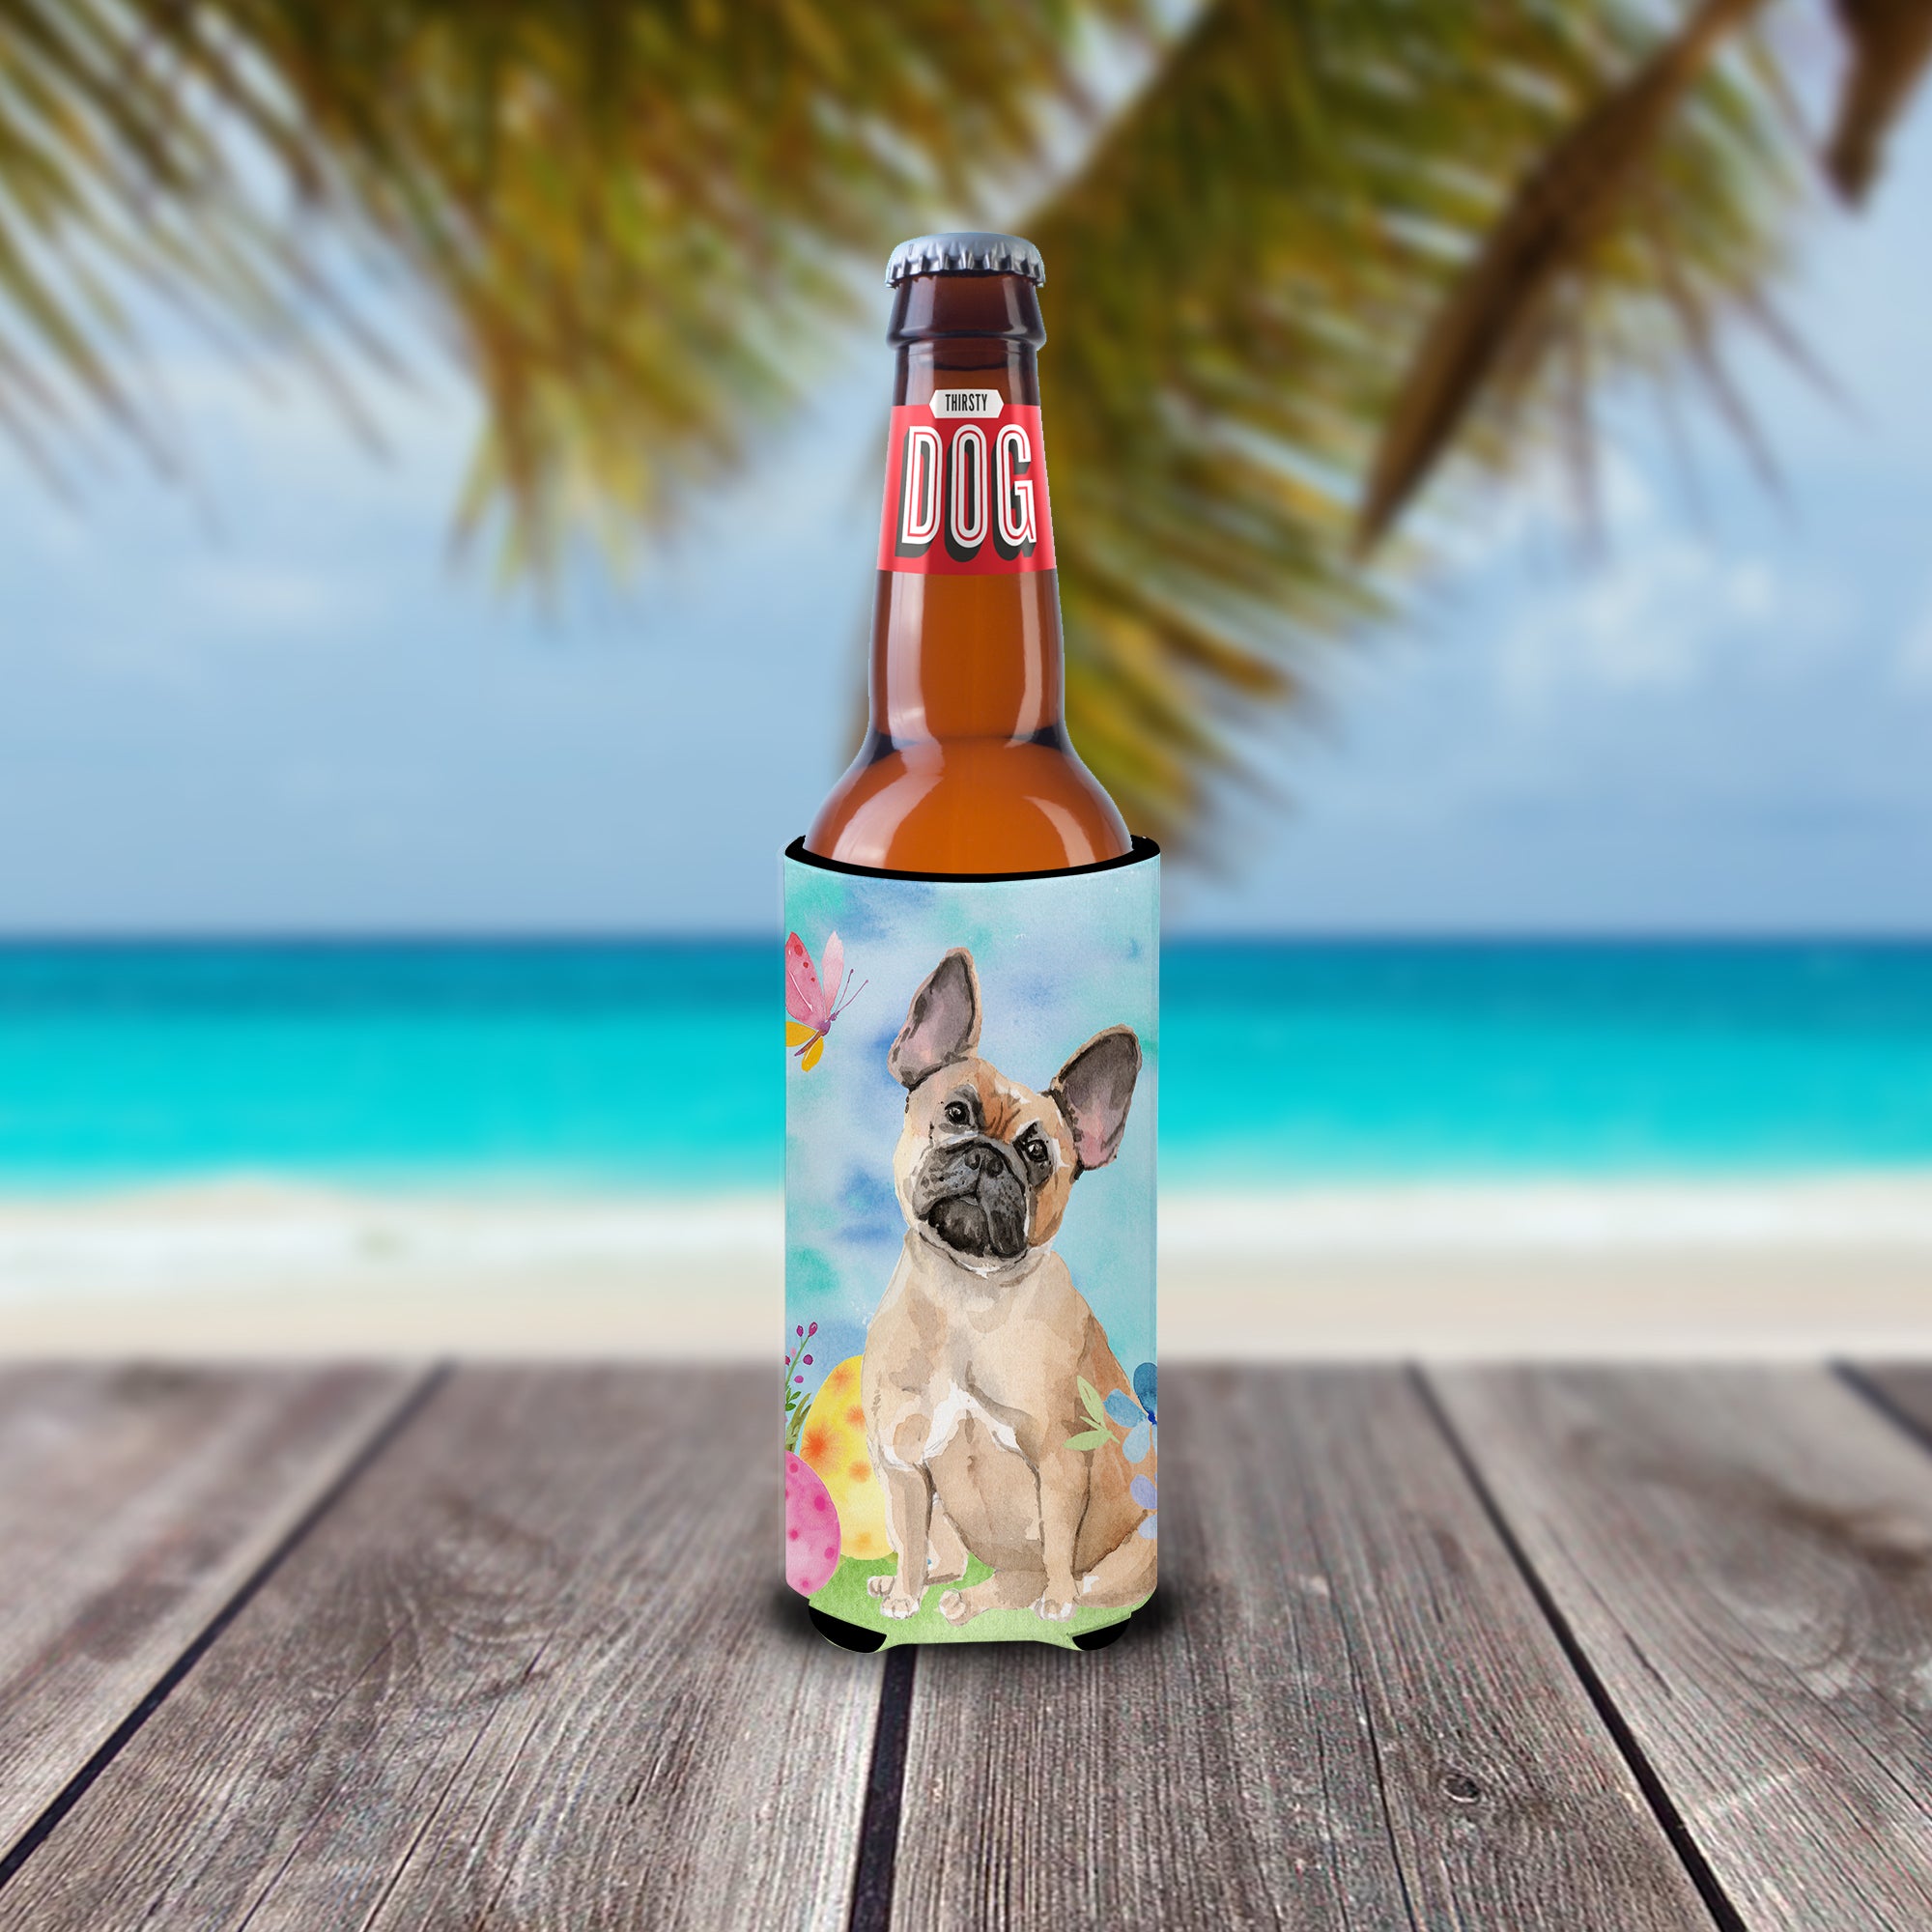 Fawn French Bulldog Easter  Ultra Hugger for slim cans BB9637MUK  the-store.com.